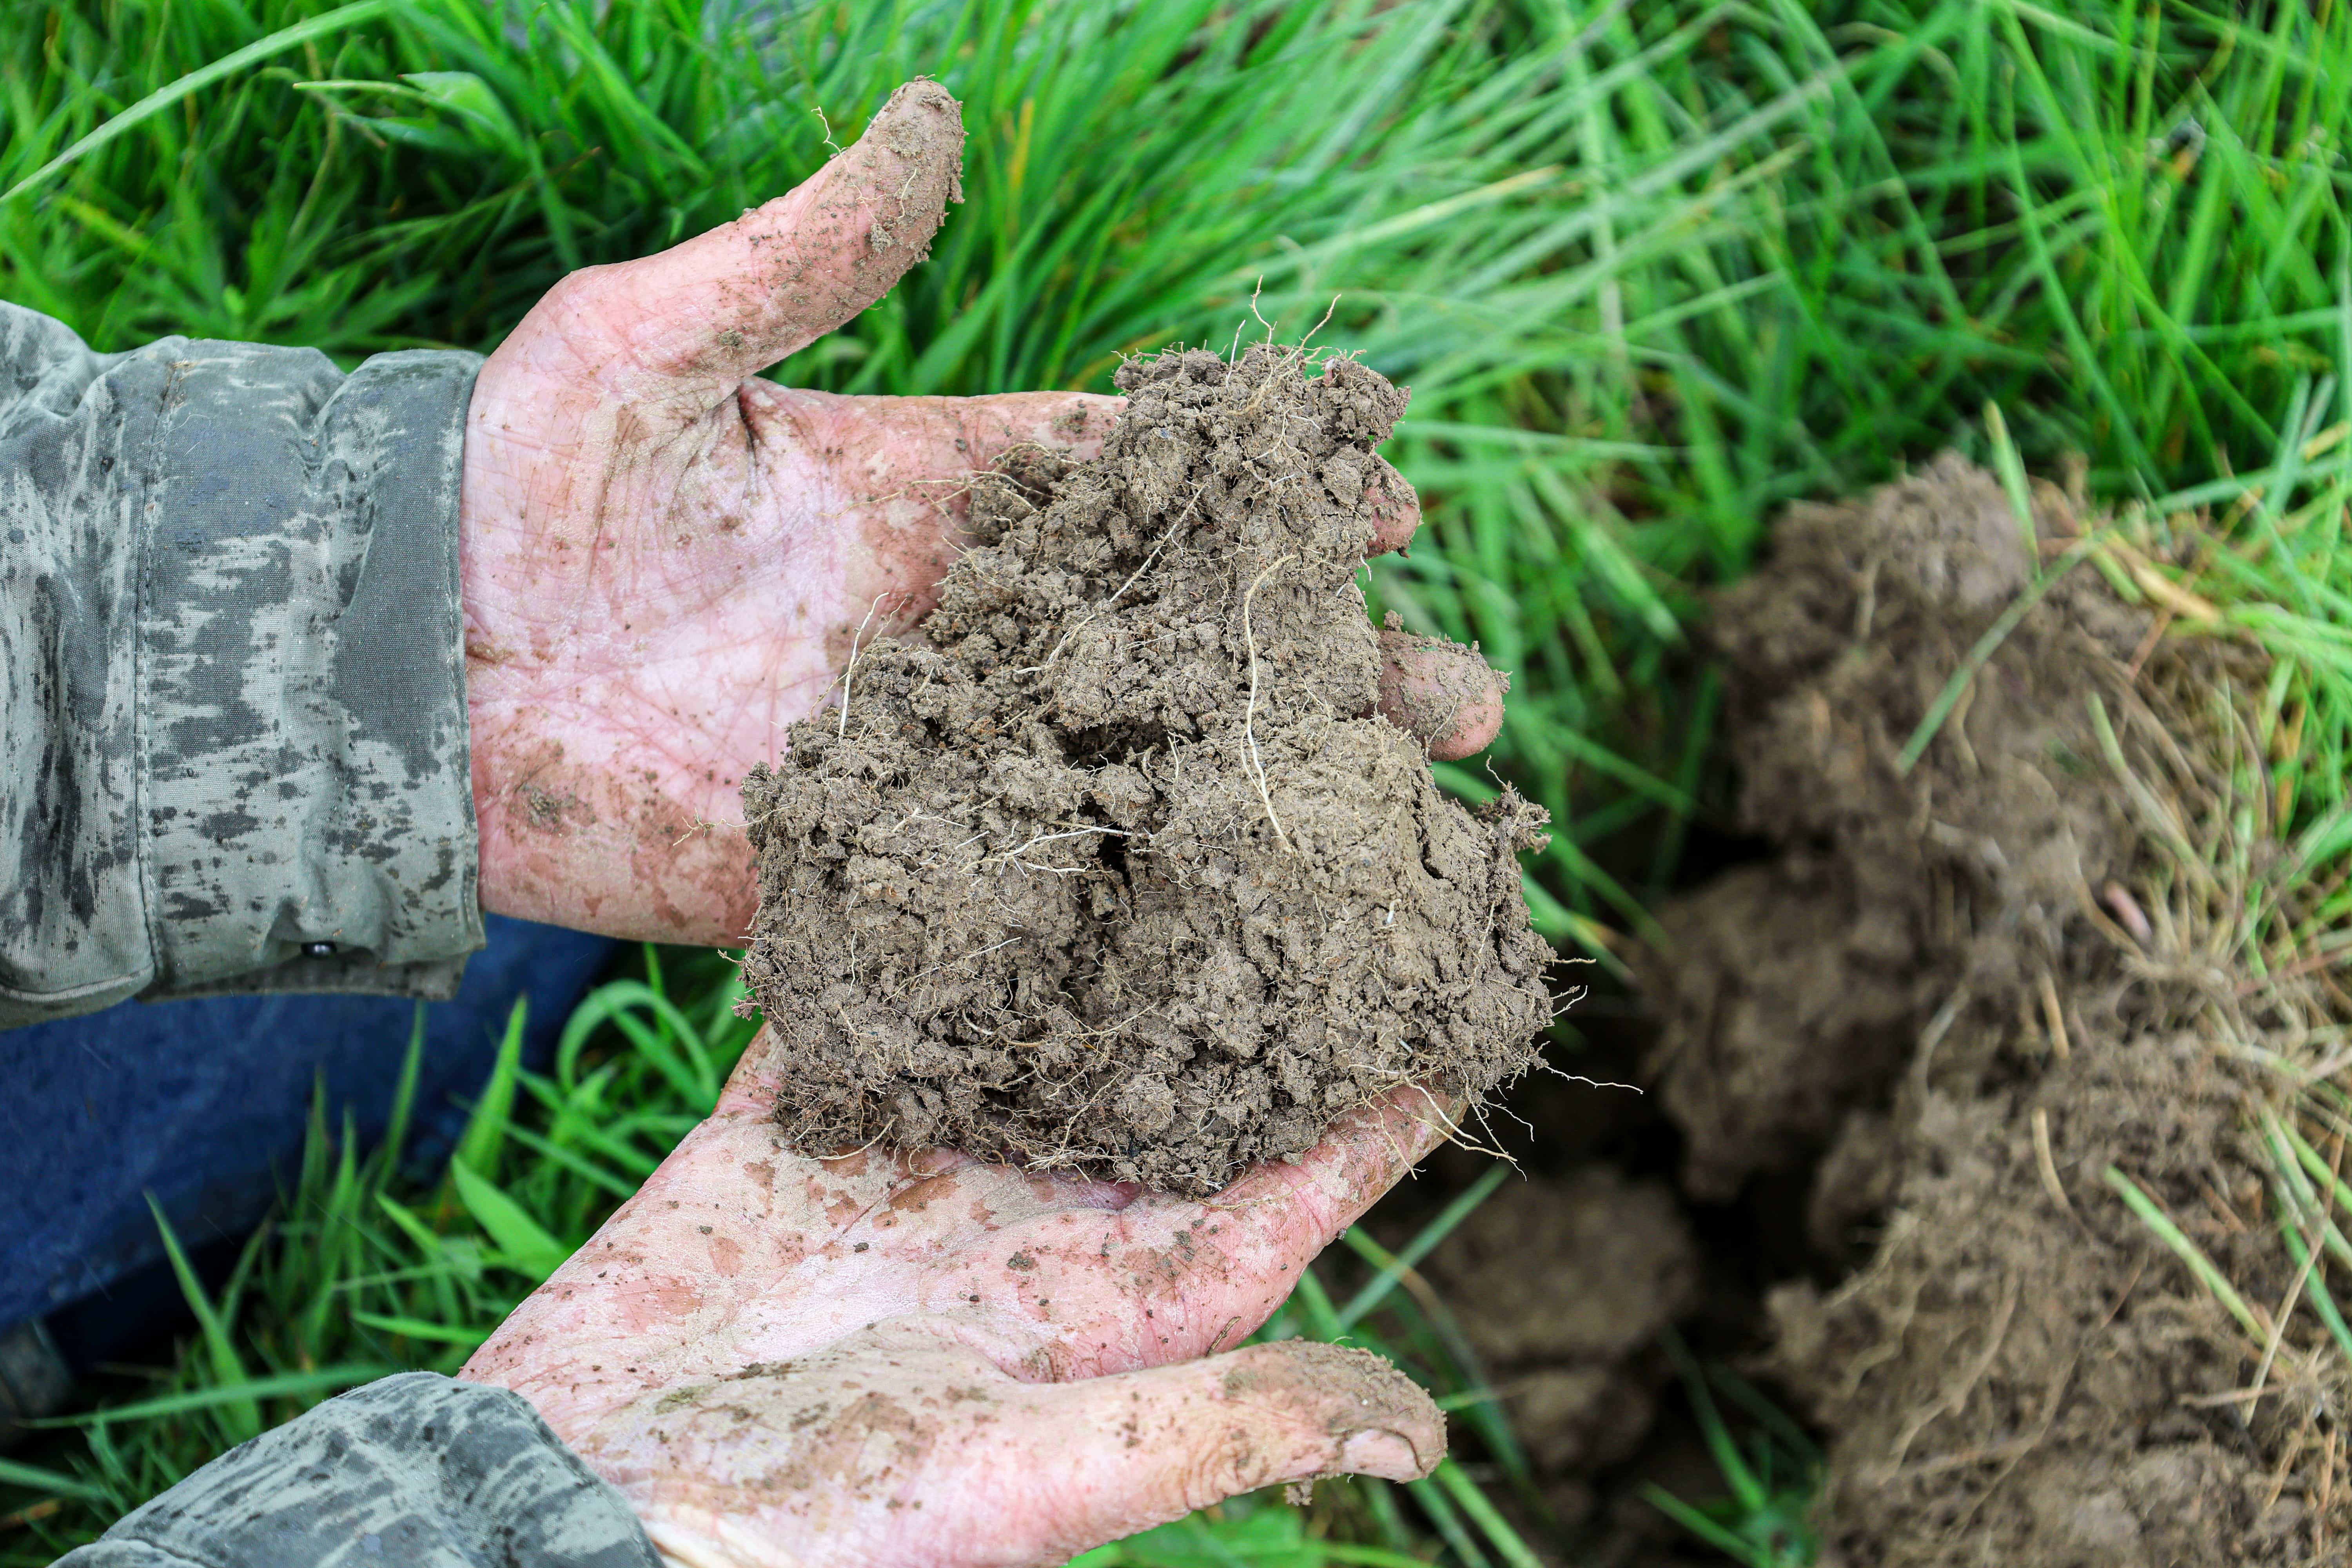 Soil being held in a pair of hands. There are roots, bits of grass and bugs